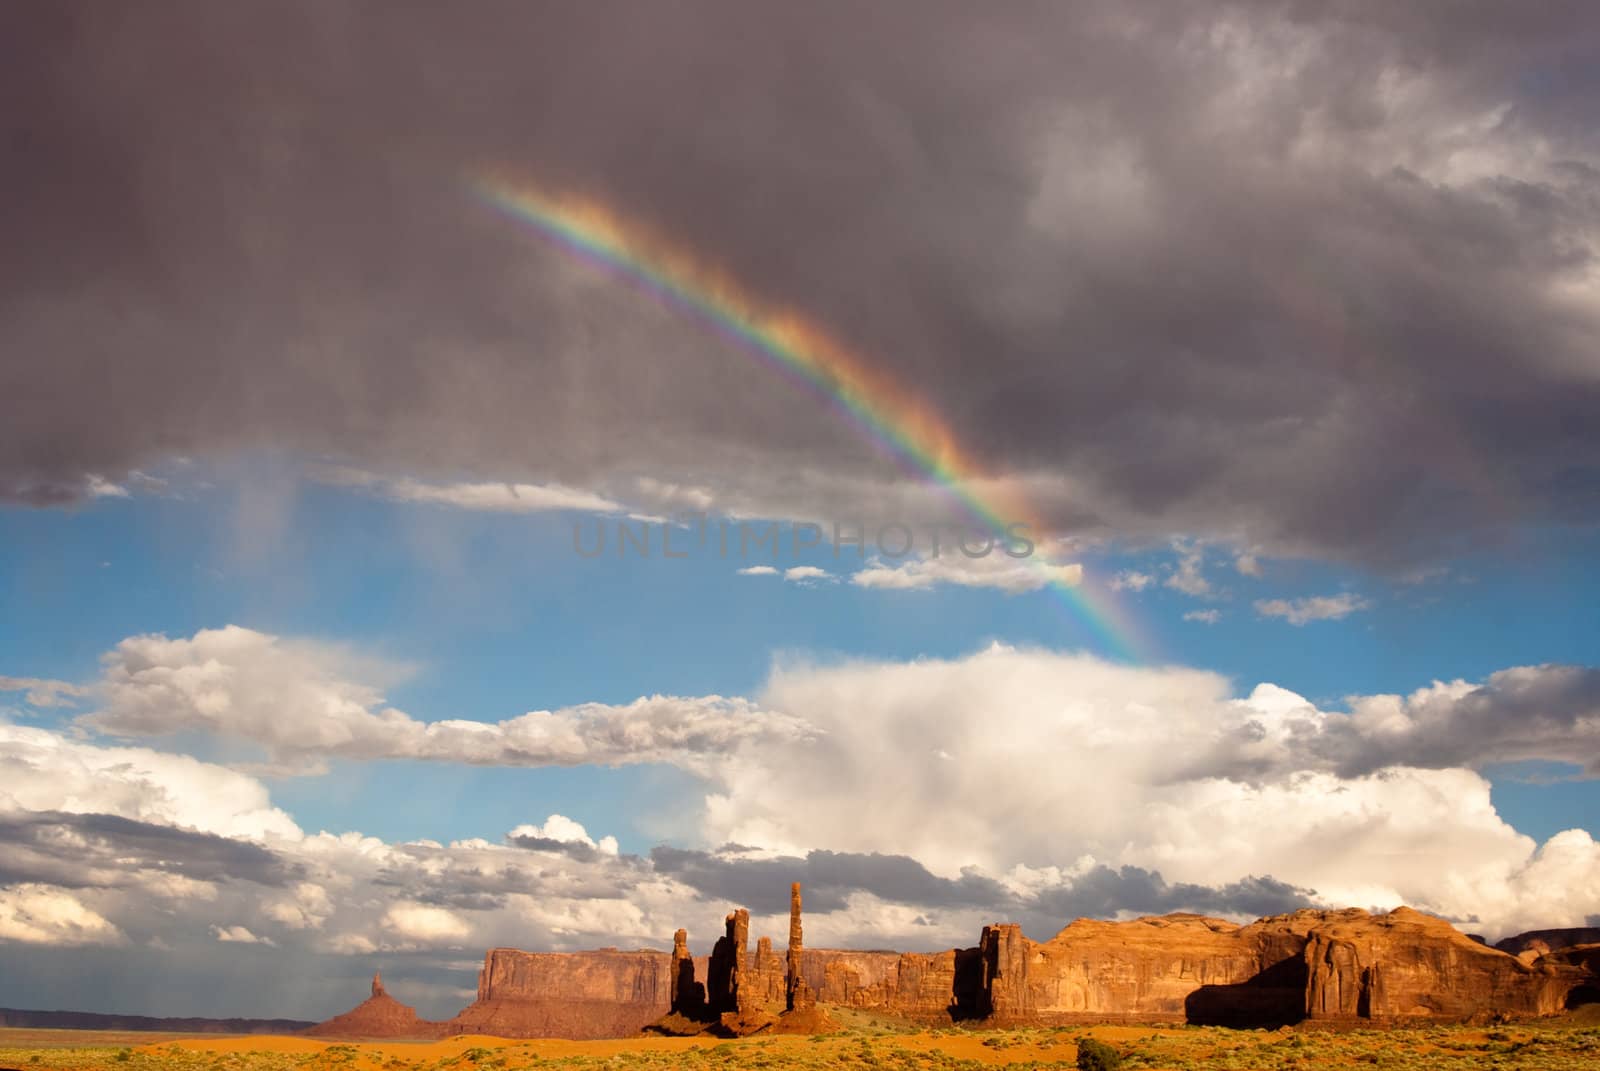 Rainbow and sunlight brighten Monument Valley after the storm